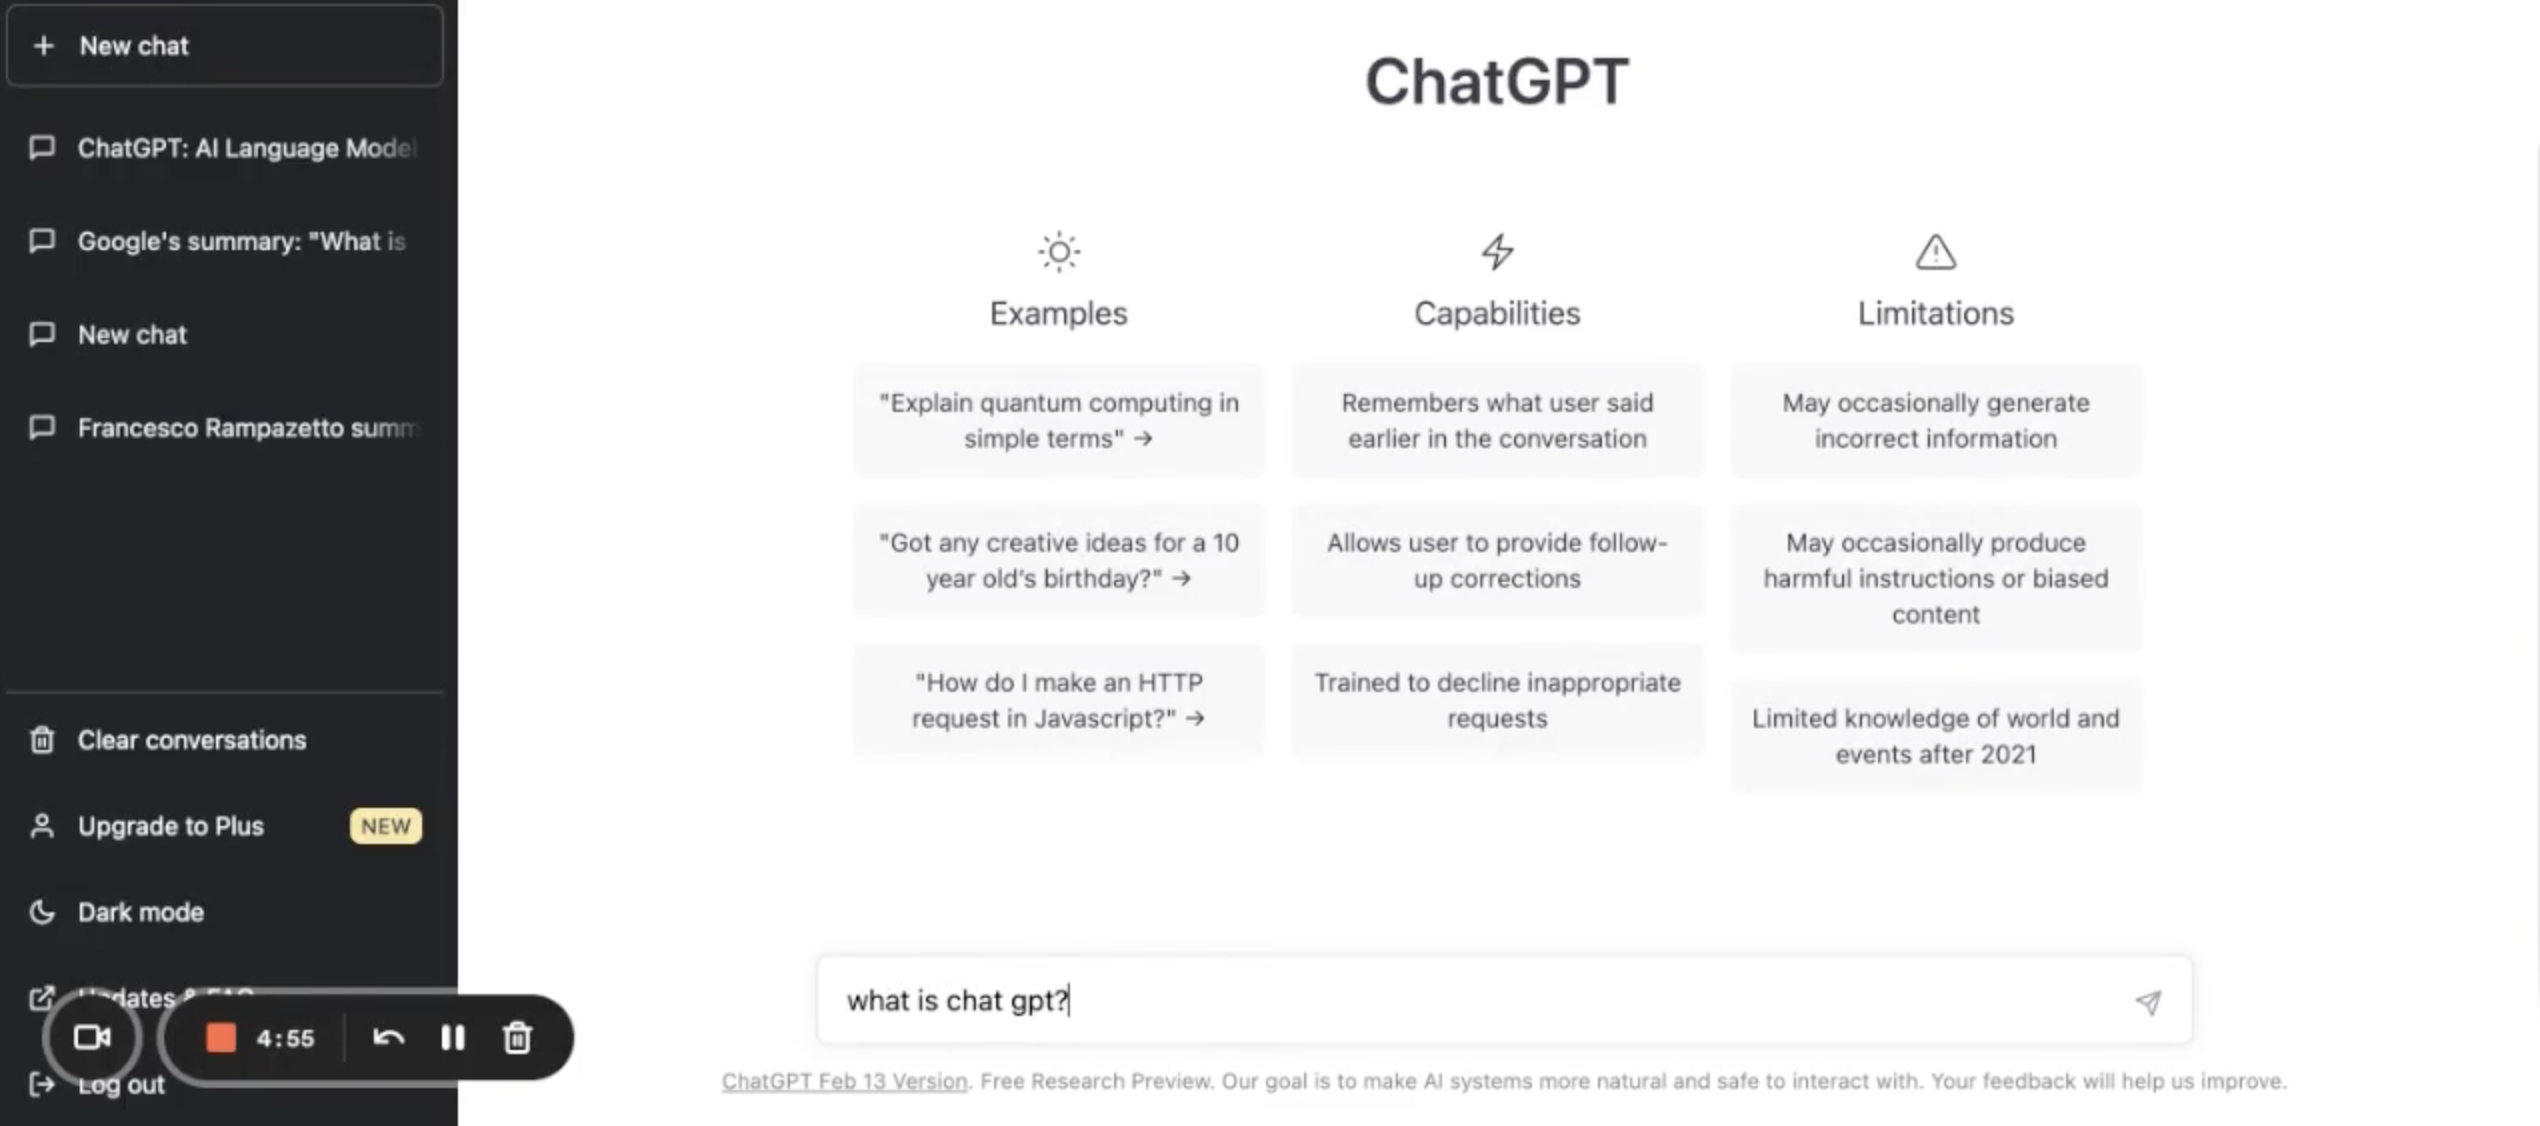 what is chat gpt?